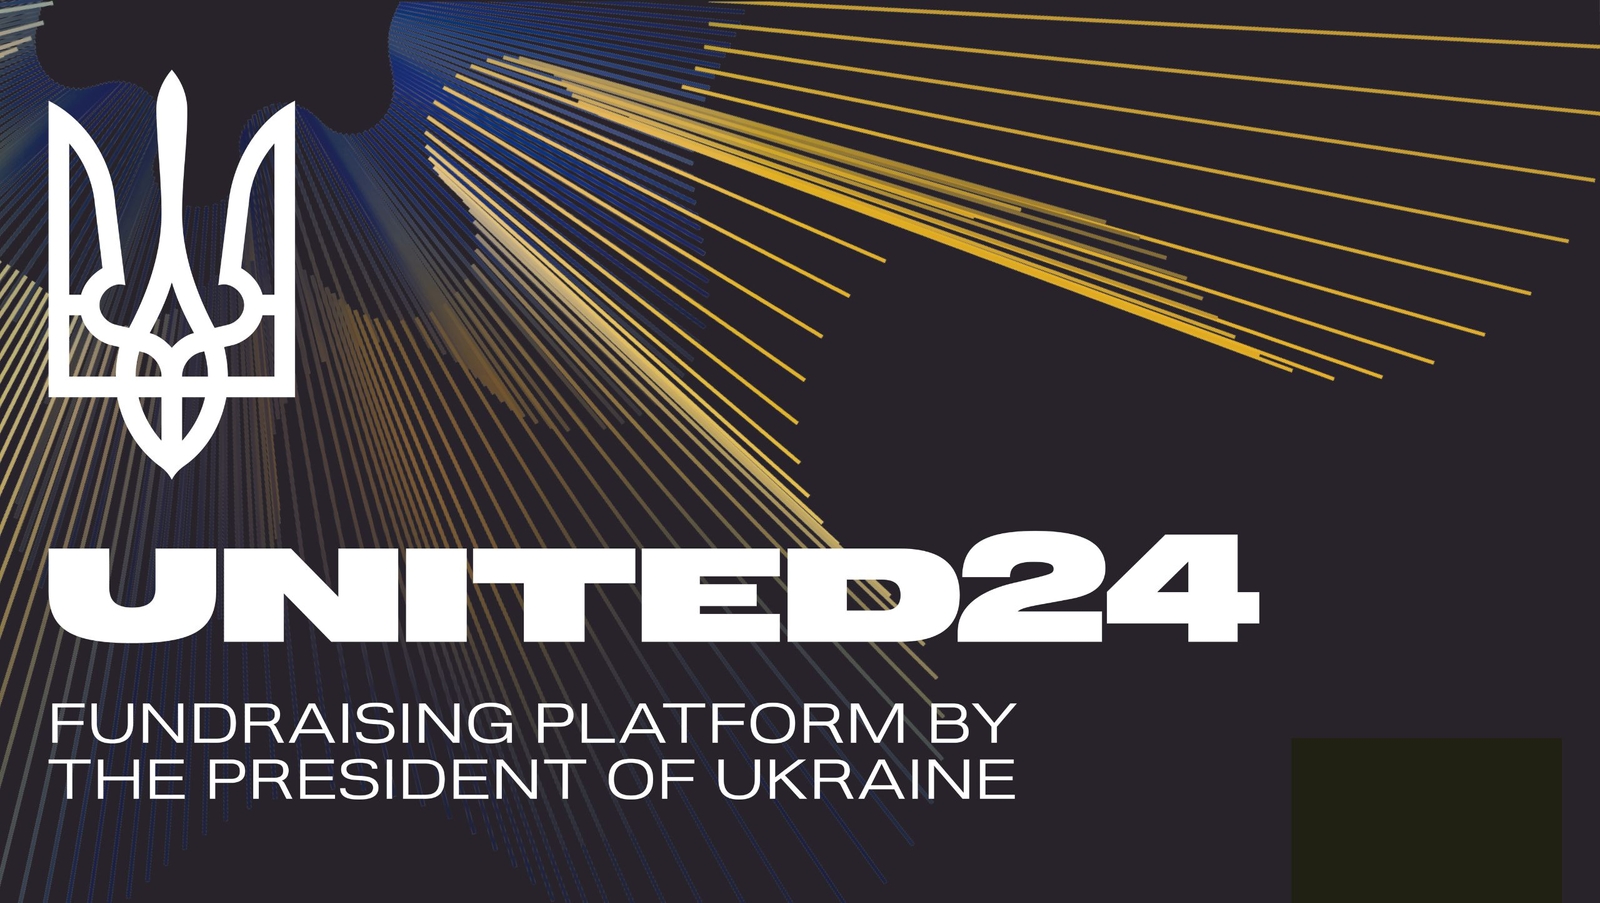 The UNITED24 turns 8 months old: read about our global support campaign #LightUpUkraine, partnership with UBER, and Mark Hamill's fundraiser for reconnaissance drones